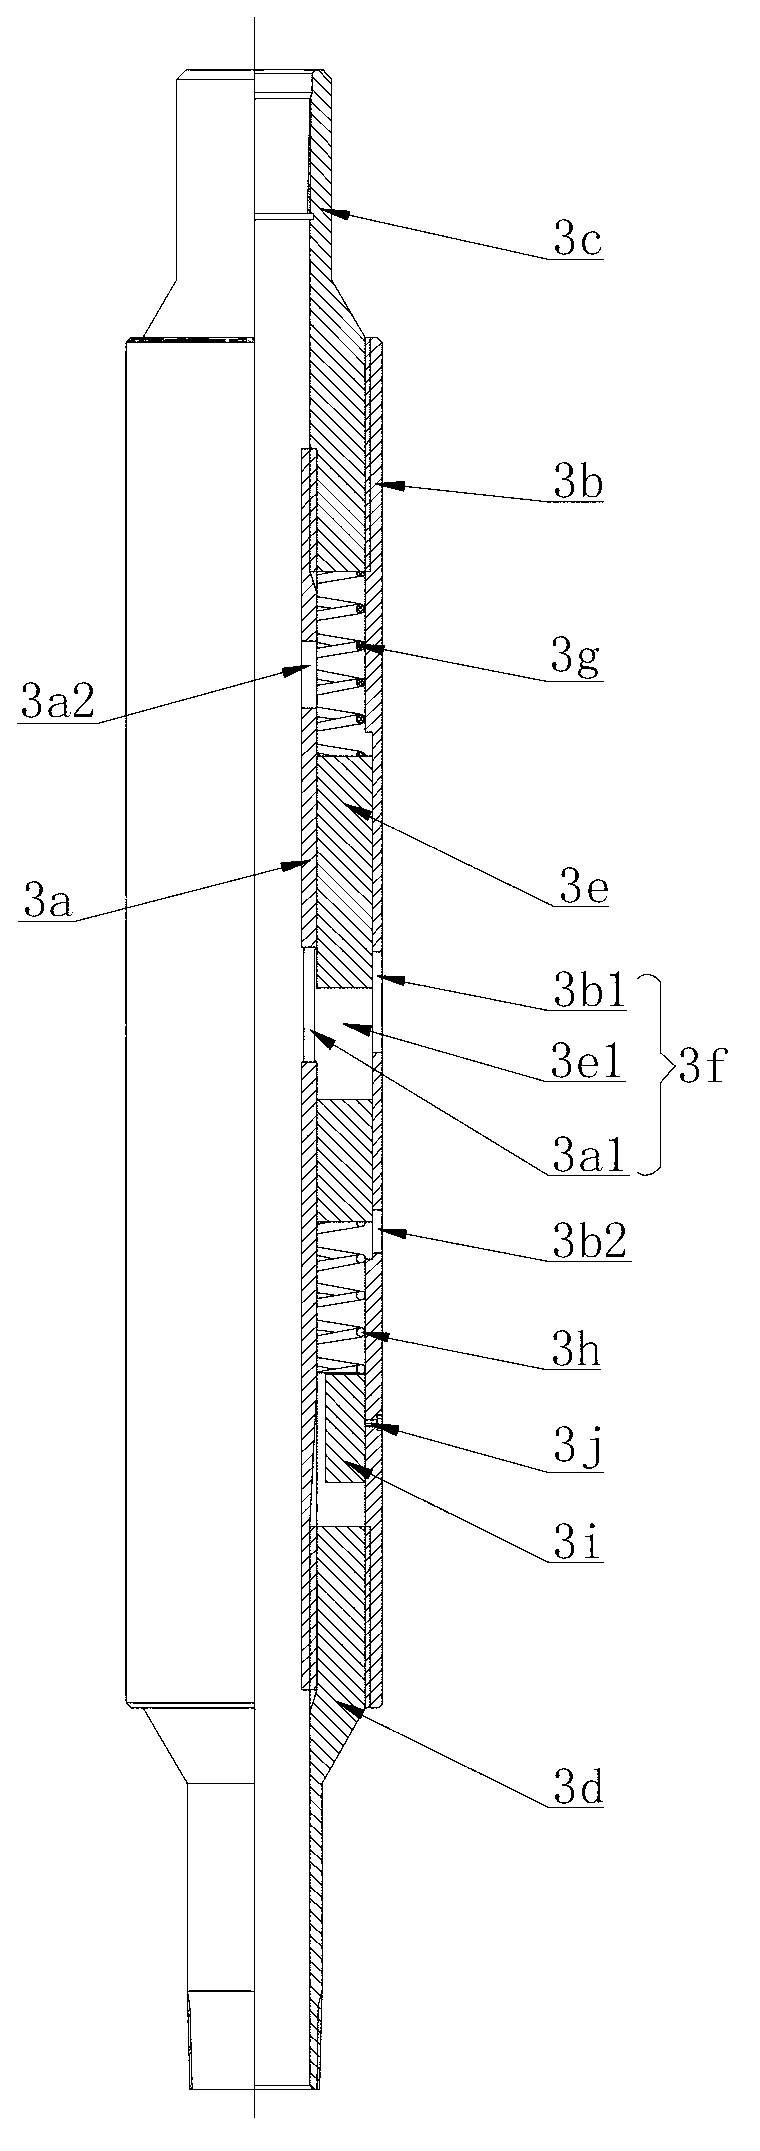 Automatic matching injection tubular column for injecting air and steam